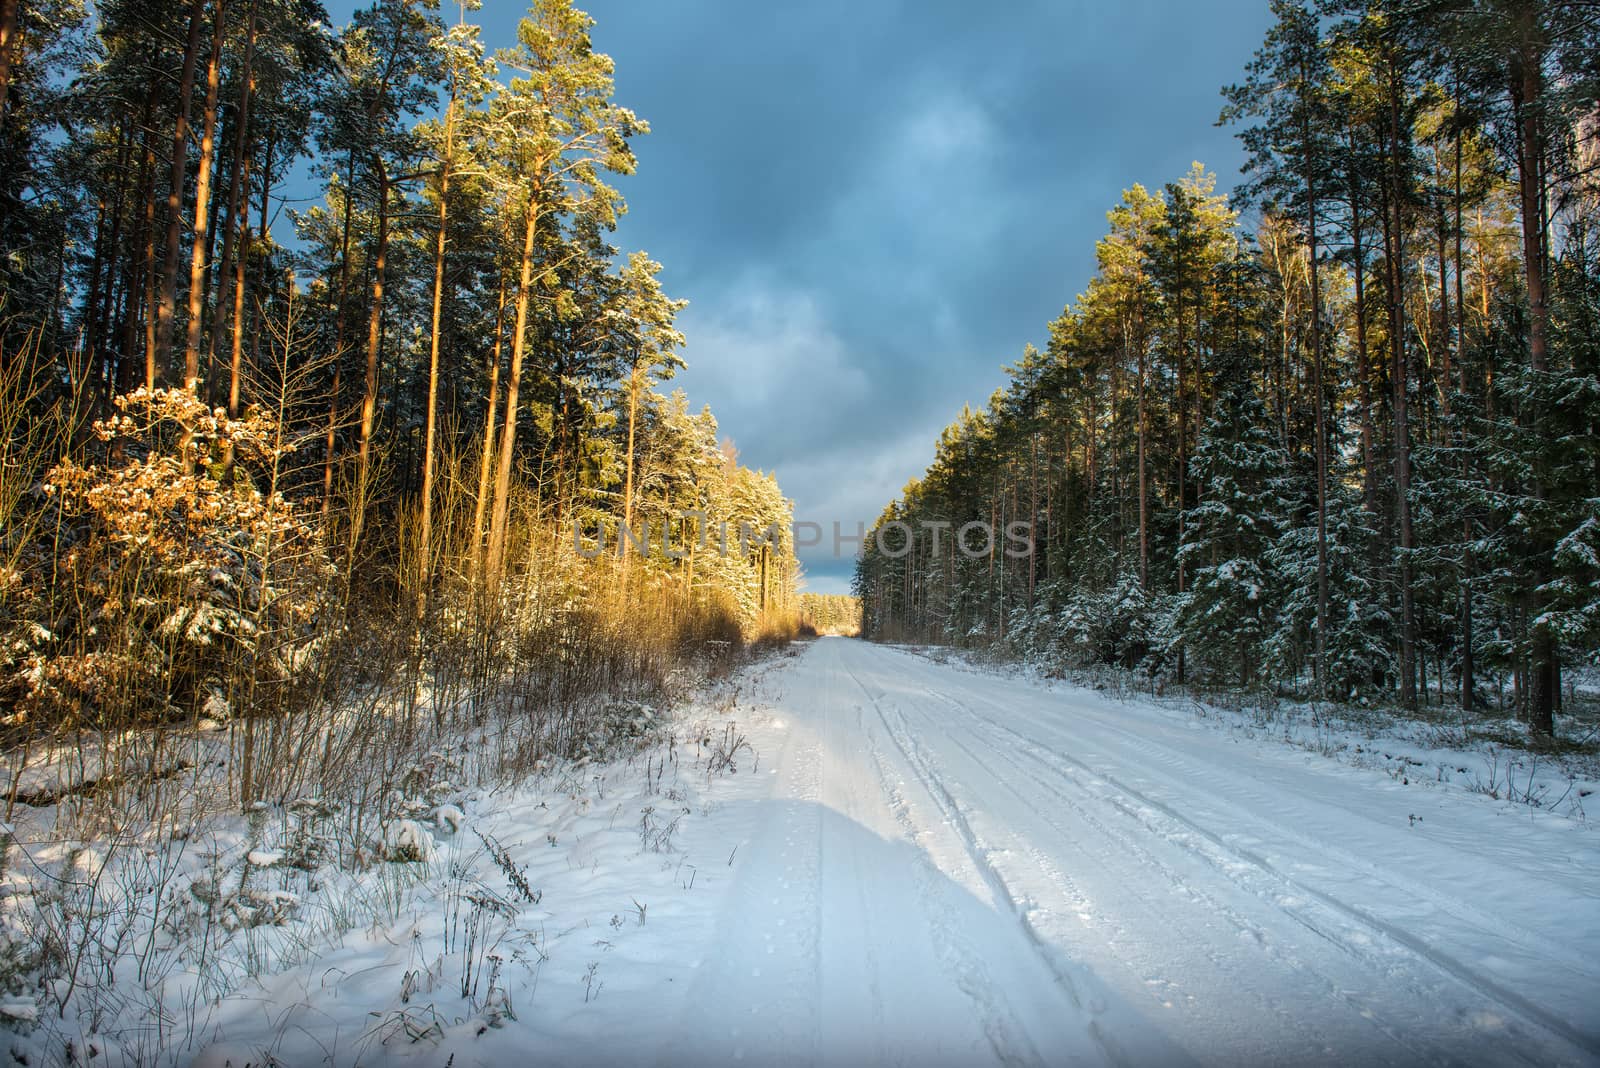 Empty snow covered road in winter landscape by Draw05